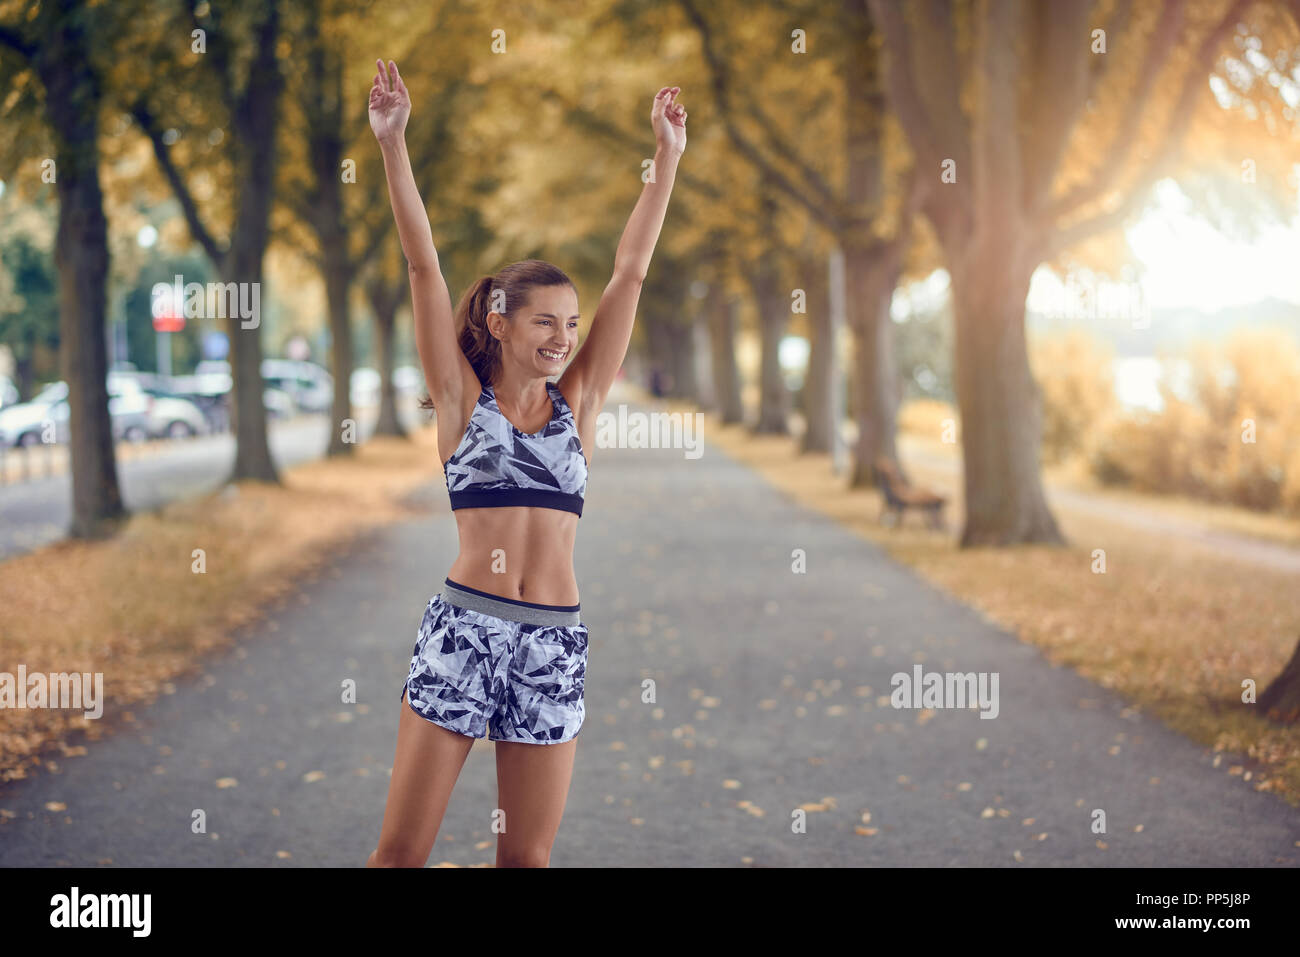 Fit happy slender healthy young woman in sportswear standing in a tree lined avenue raising her arms with a beaming smile Stock Photo